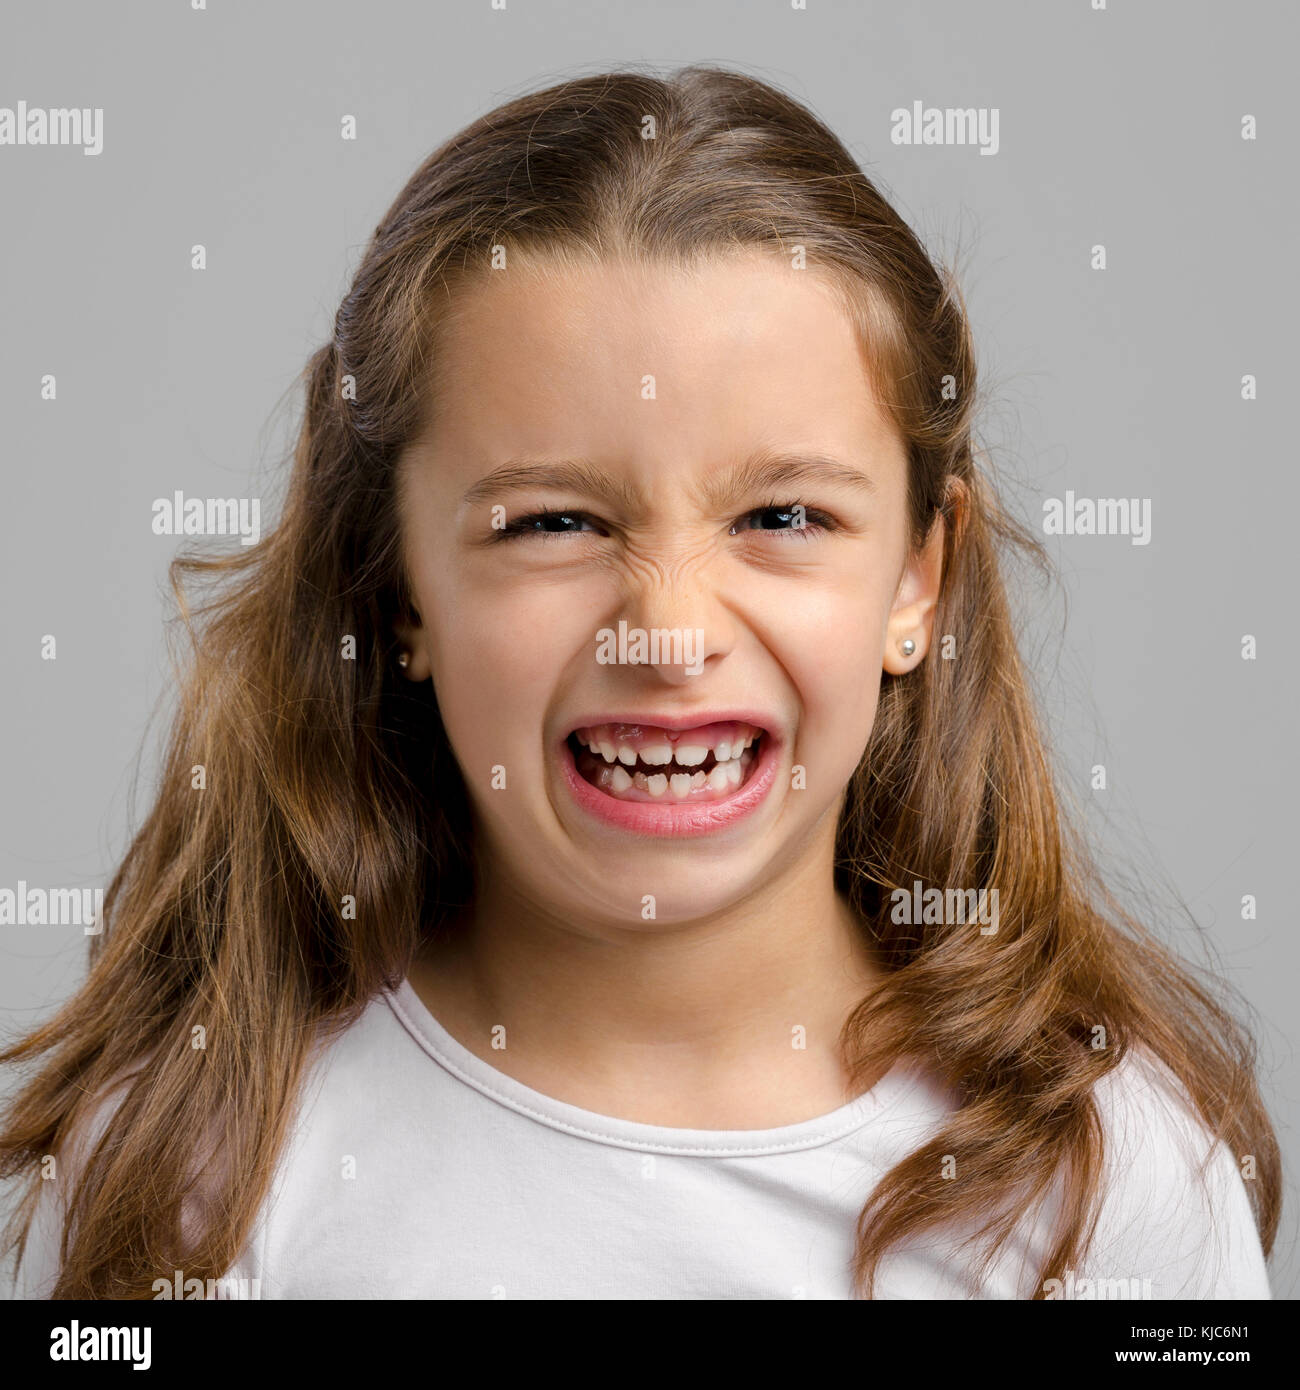 Portrait of a little girl with a funny expression Stock Photo